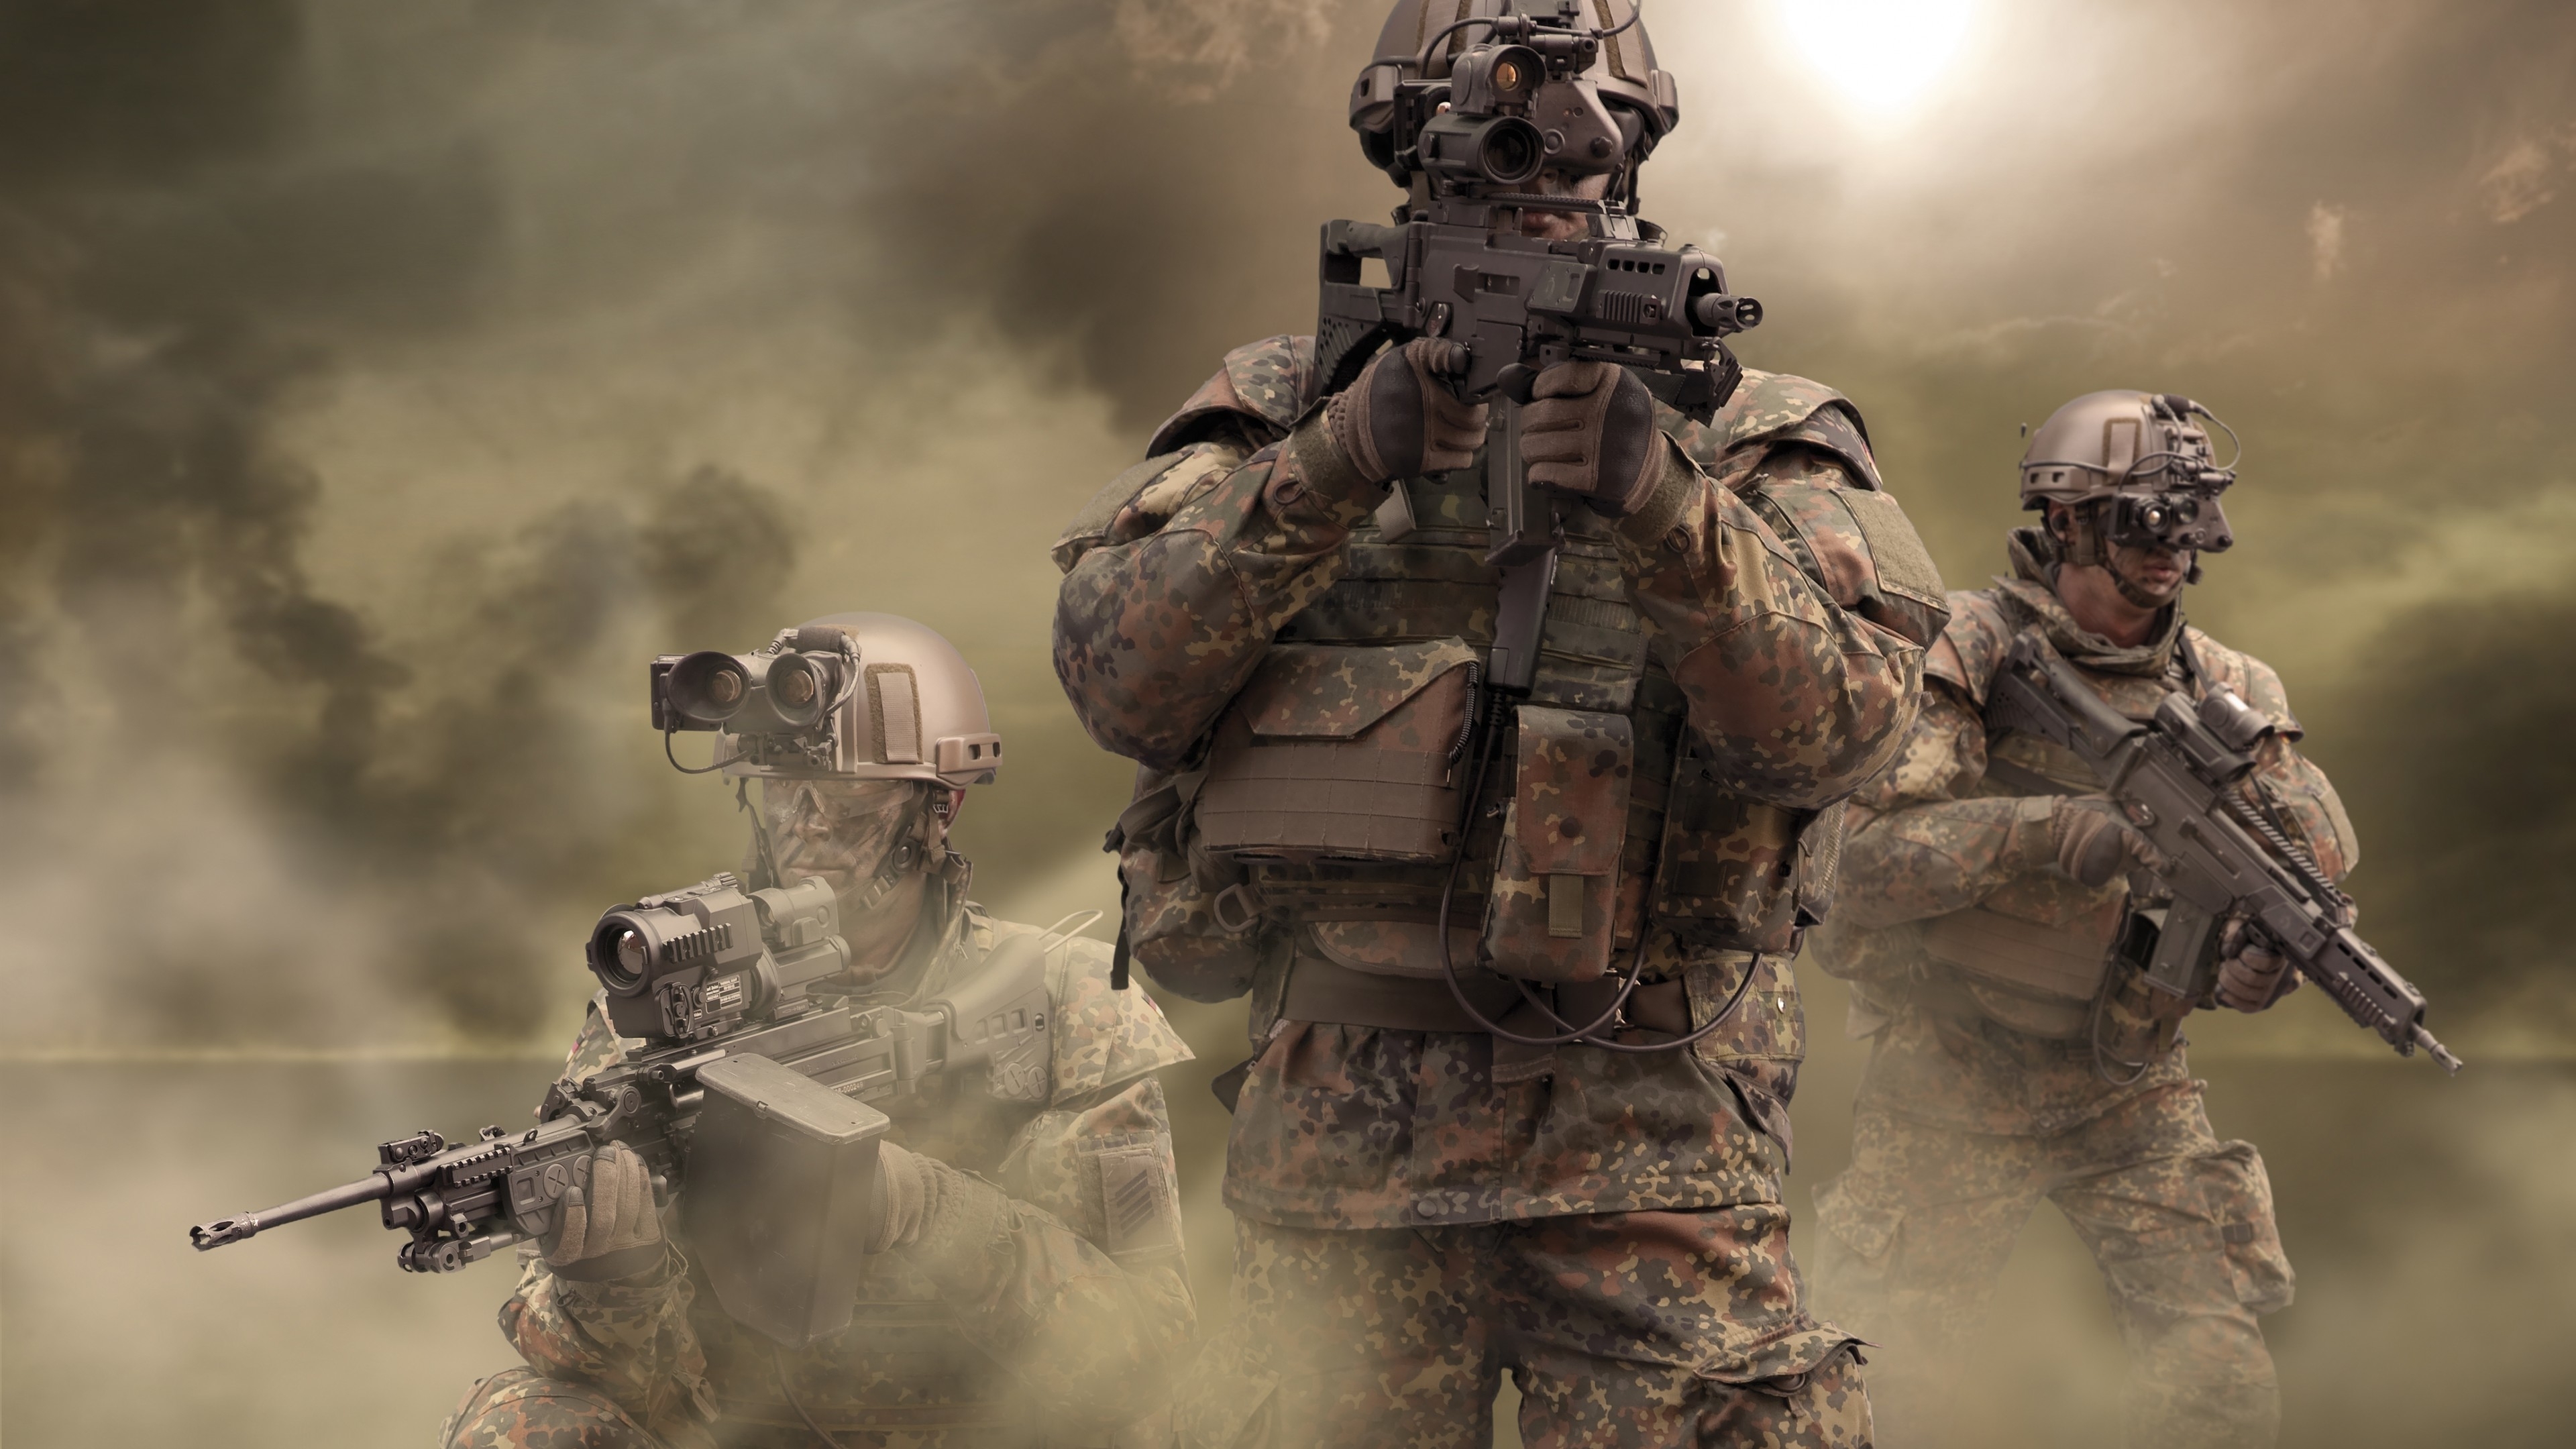 10 Best Army Ranger Wall Paper FULL HD 1080p For PC Background 2020